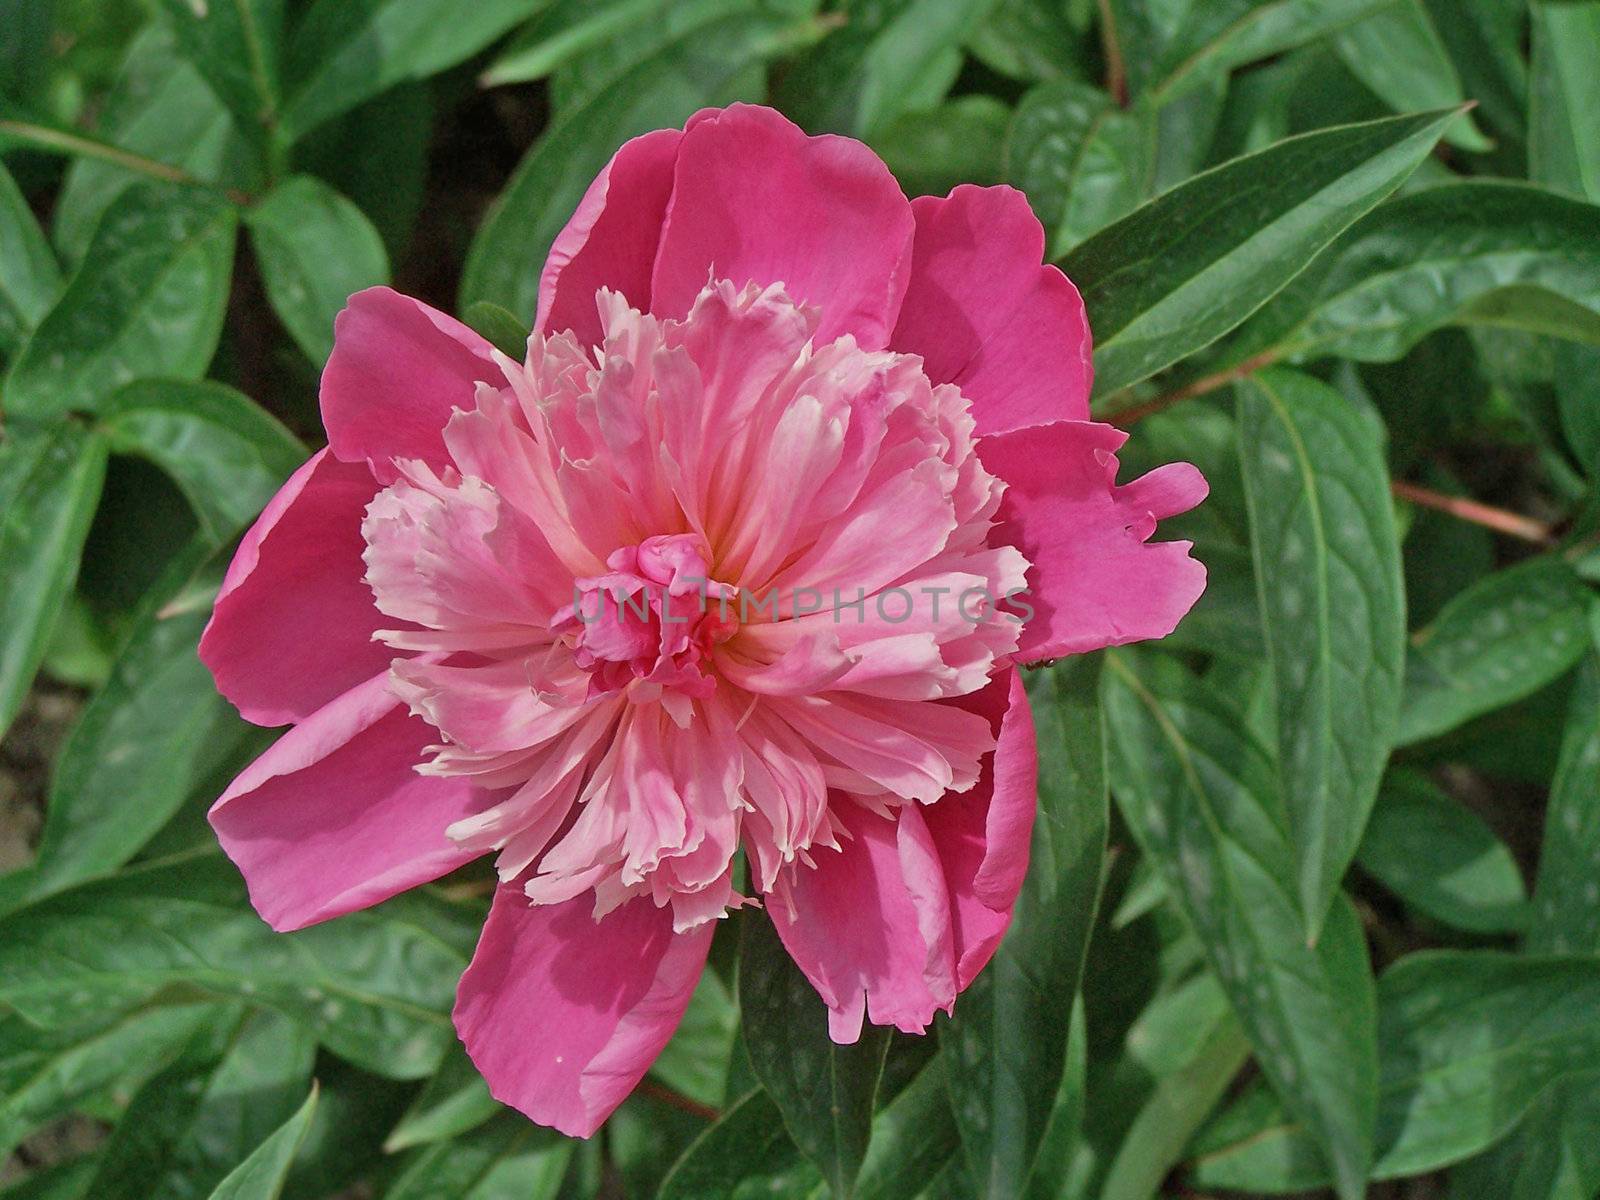 Close up of the pink peony among leaves.